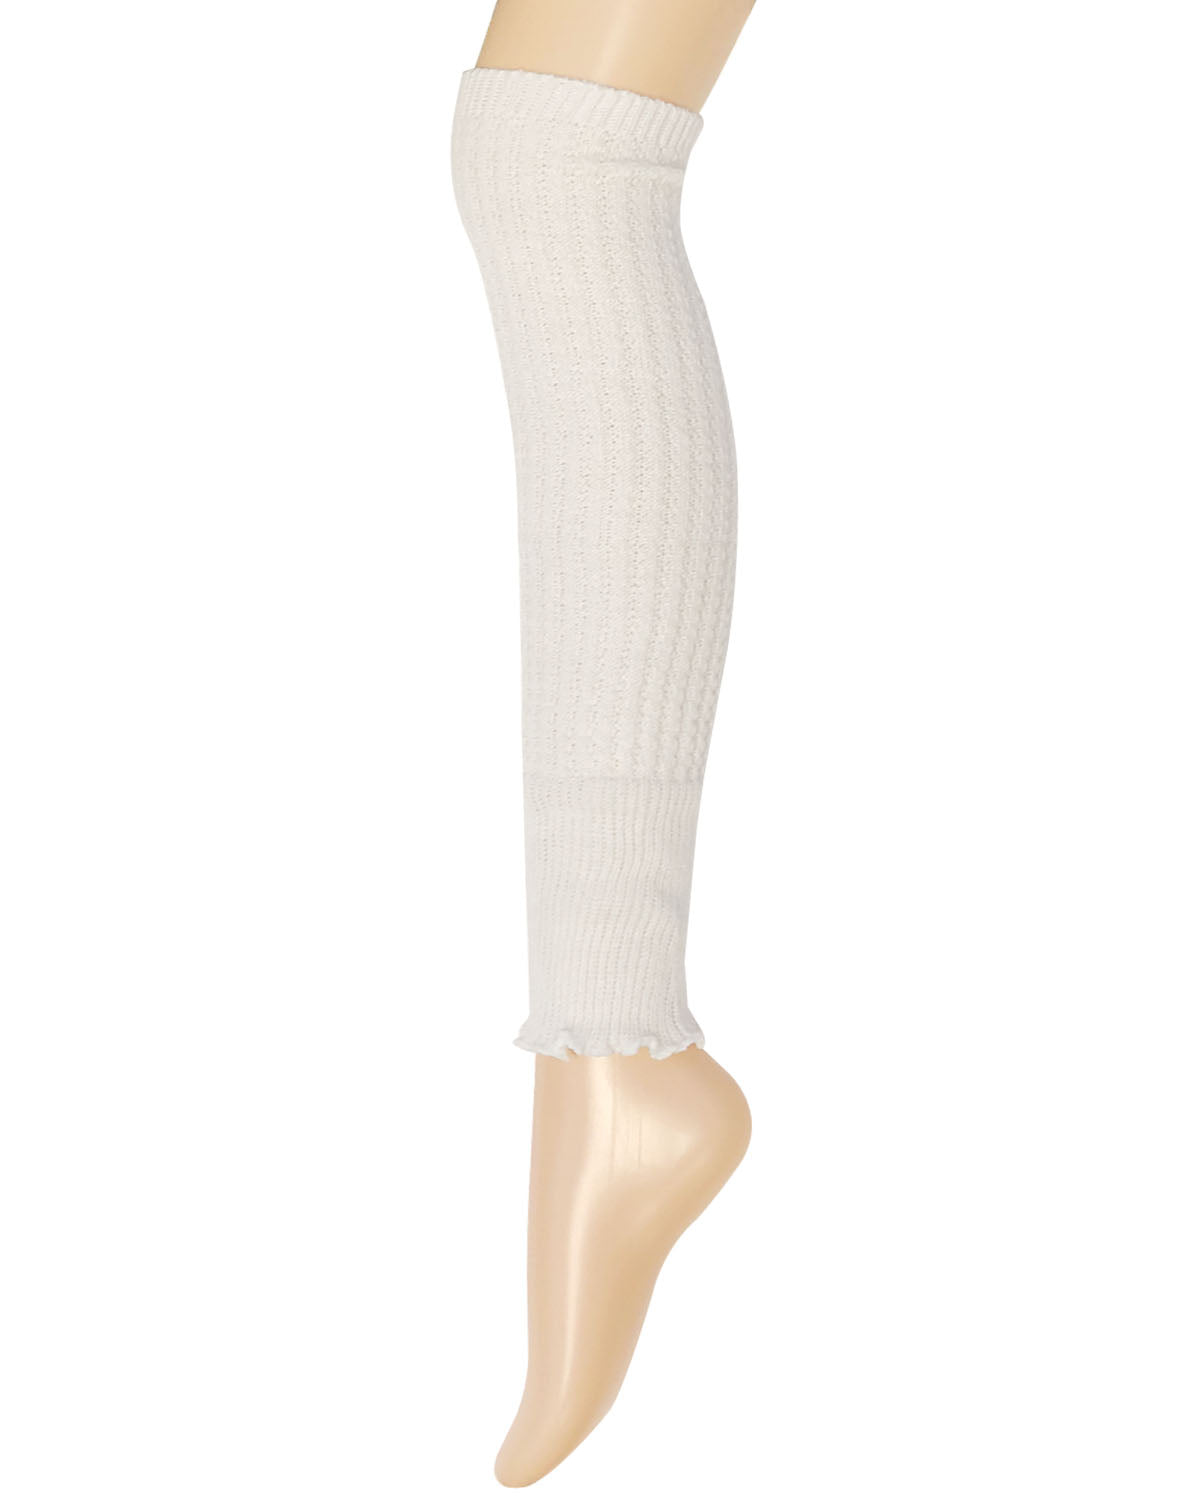 Wrapables Women's Ribbed Warm Knitted Leg Warmers